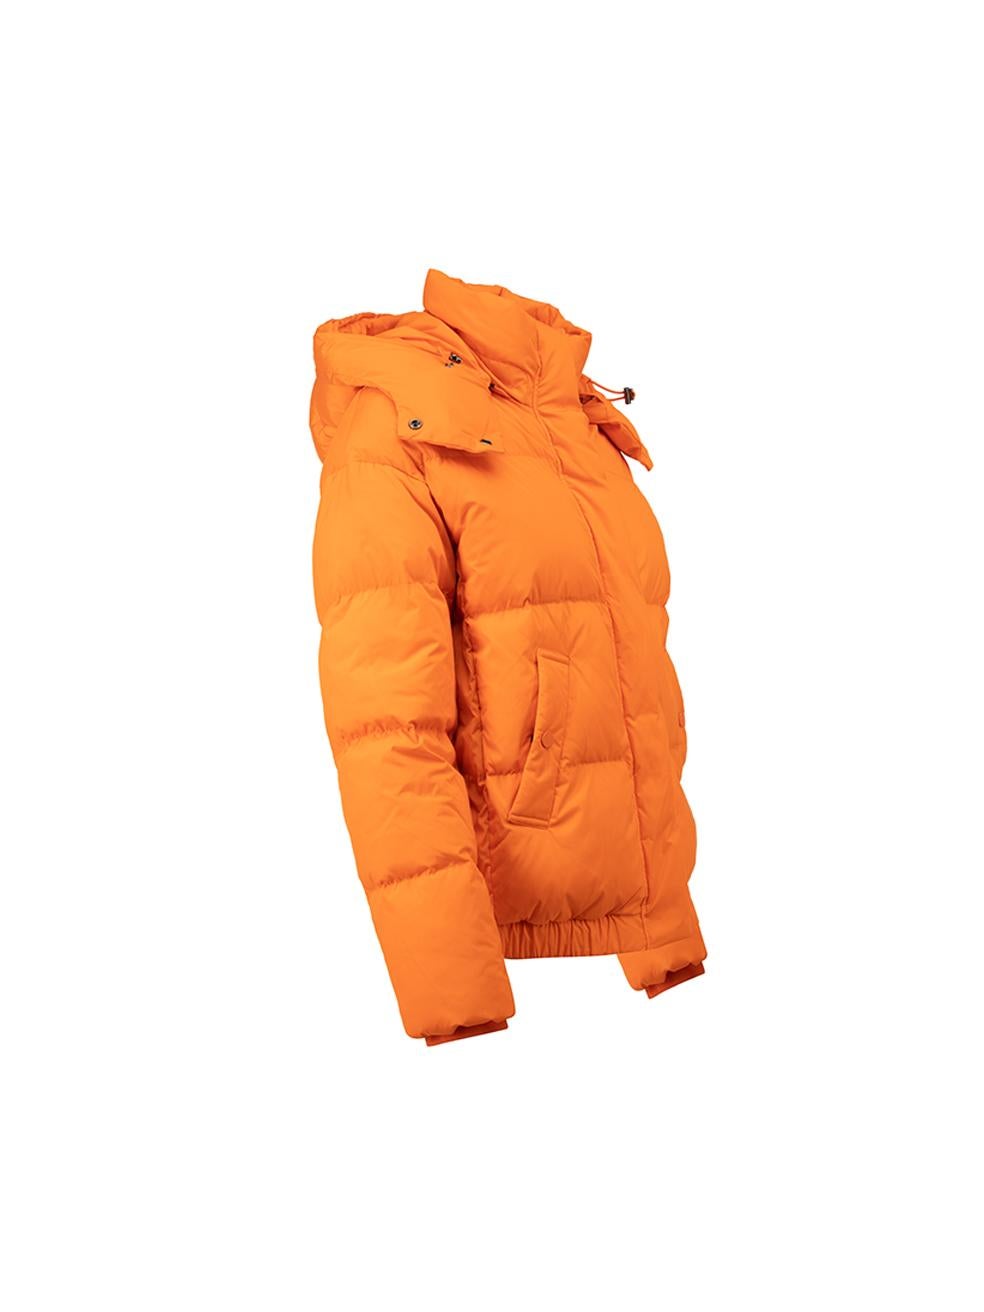 CONDITION is Very good. Minimal wear to jacket is evident. Minimal wear to the inner neckline on this used Woolrich designer resale item. 



Details


Orange

Synthetic

Puffer jacket

Short length

Zip detachable hood with drawstring

Front zip